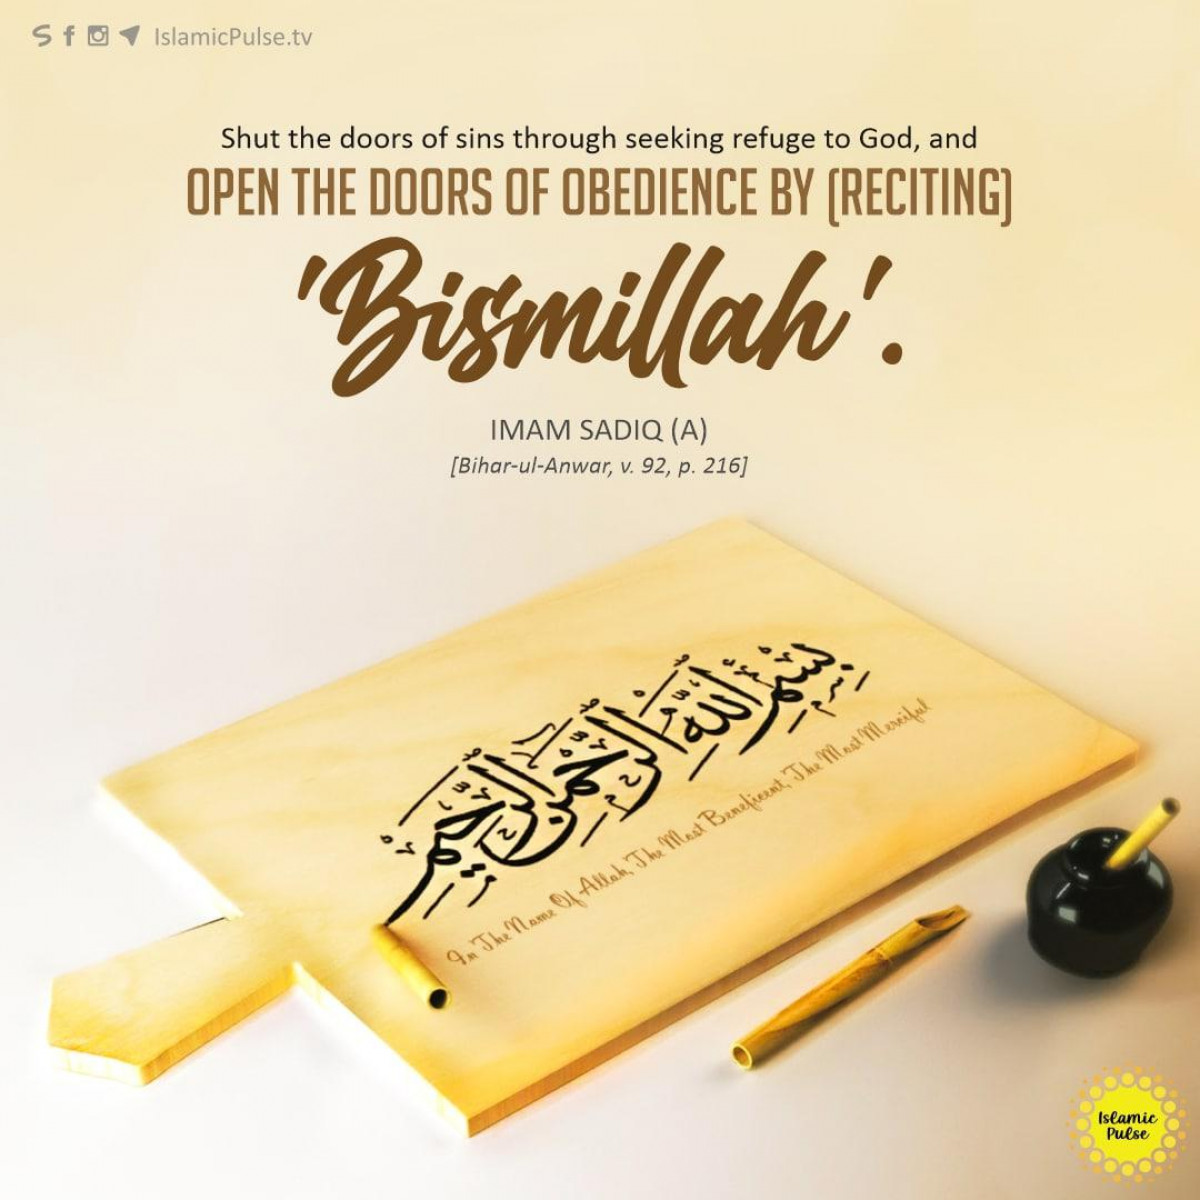 open the doors of obedience by (reciting) 'Bismillah'